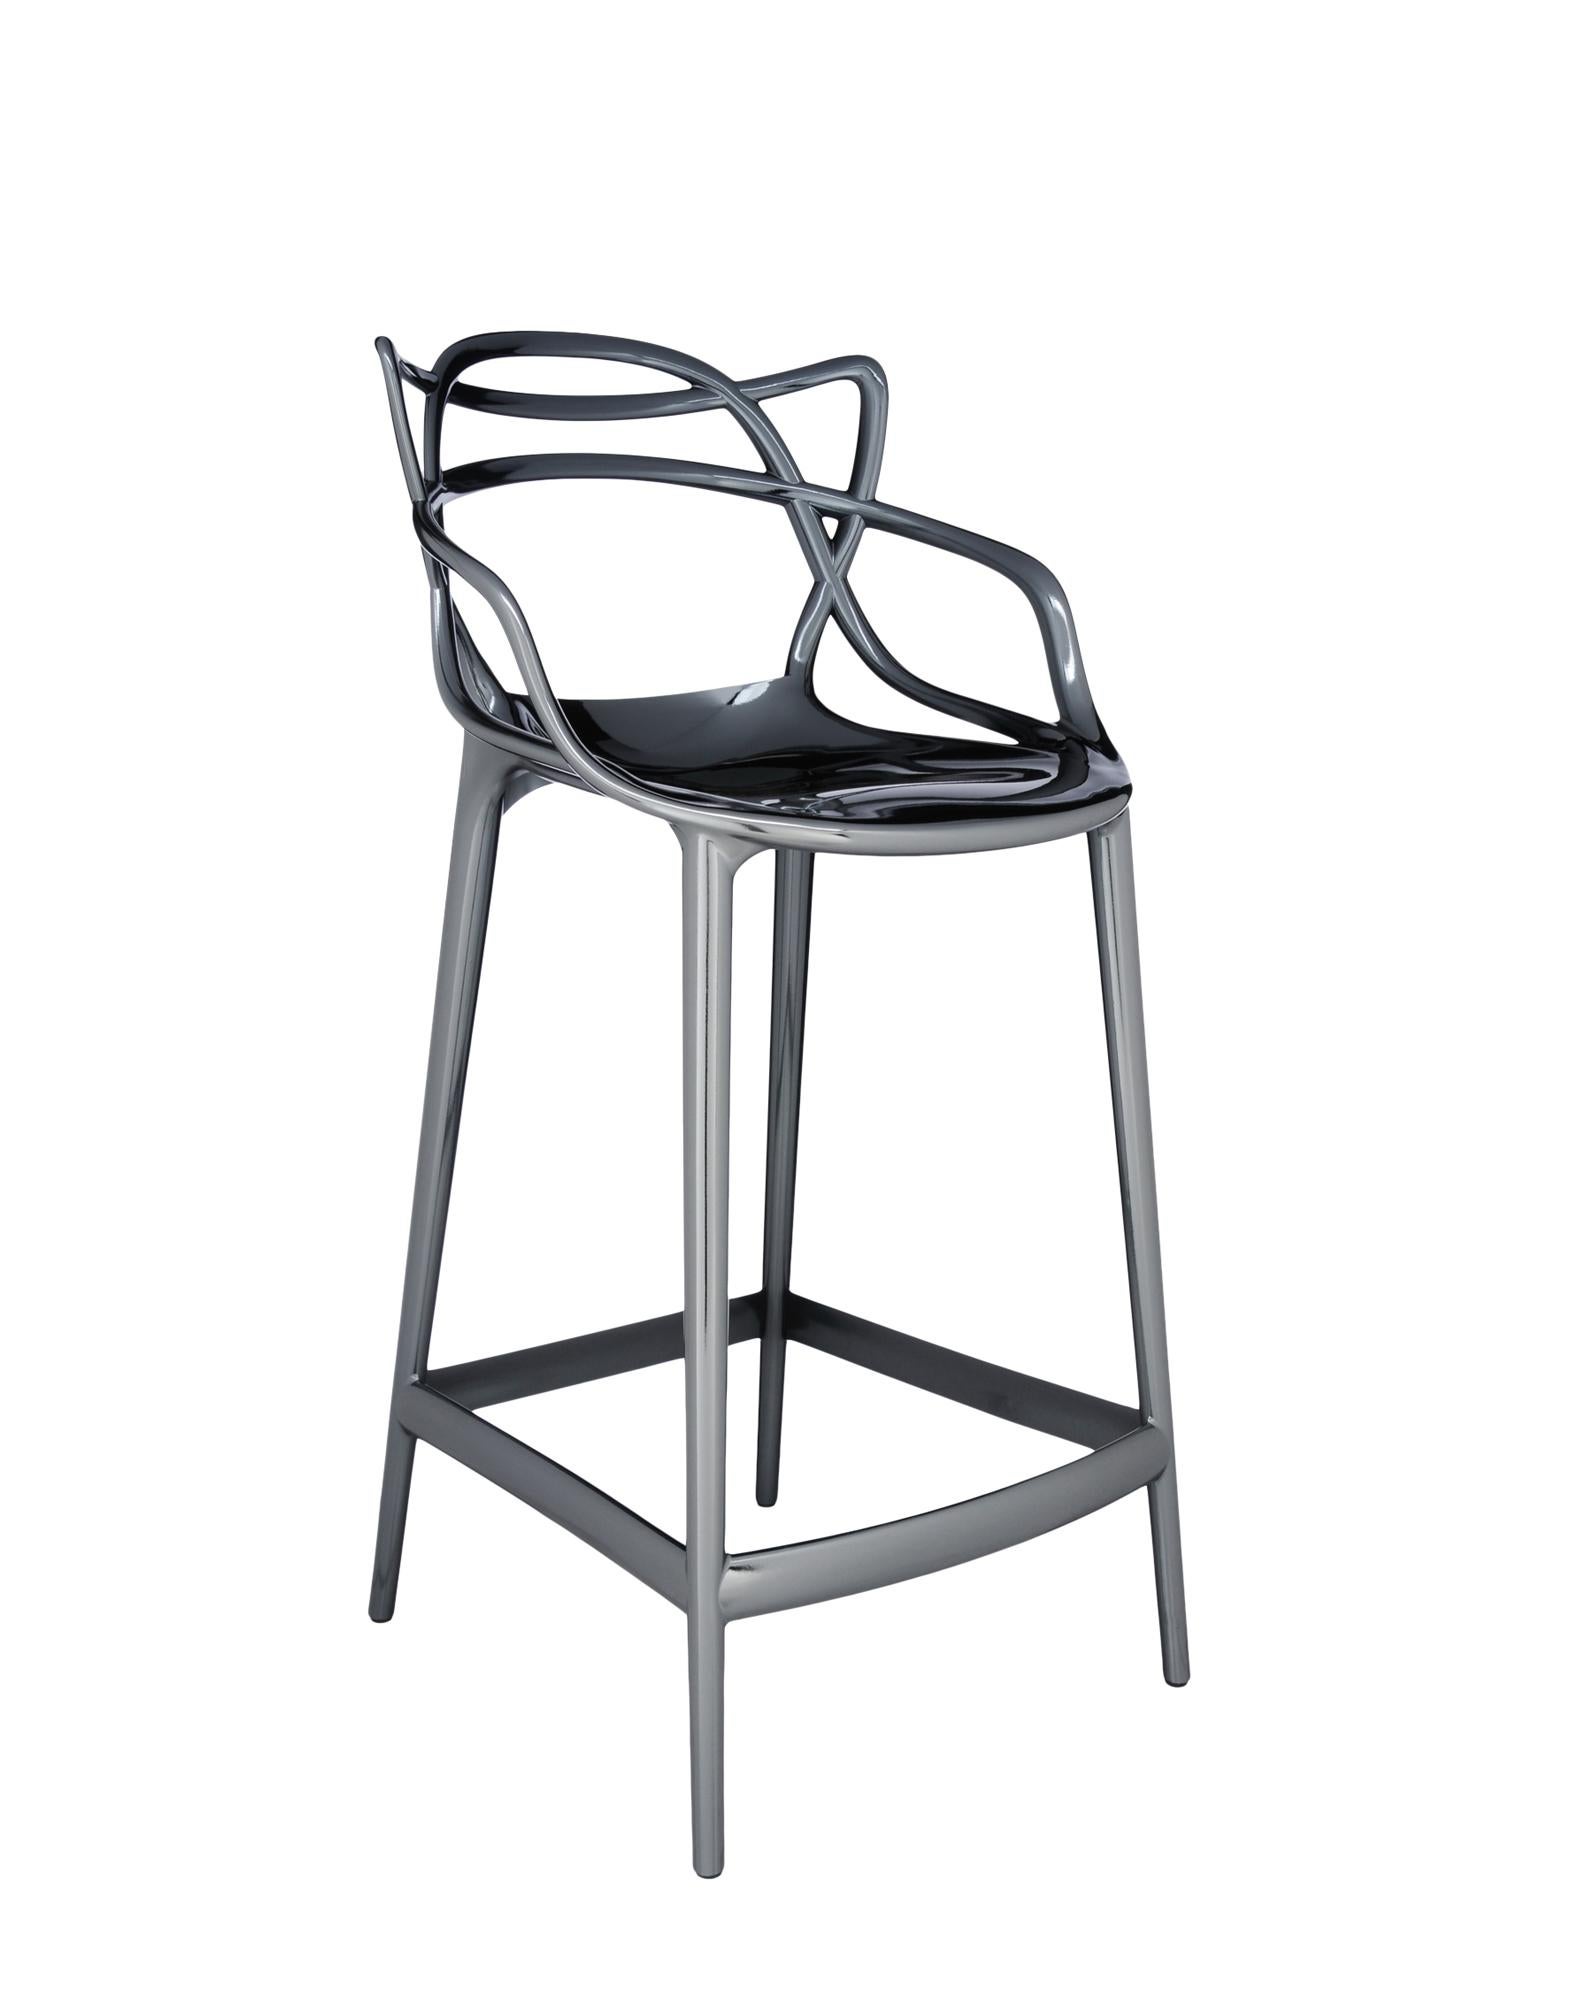 Kartell also offers a stool version of the Masters chair, winner of the Good Design Award 2010 and the Red Dot Award 2013, and a worldwide best seller. The legs are lengthened and the seat is shrunk, but the frame's unmistakable graphic look,